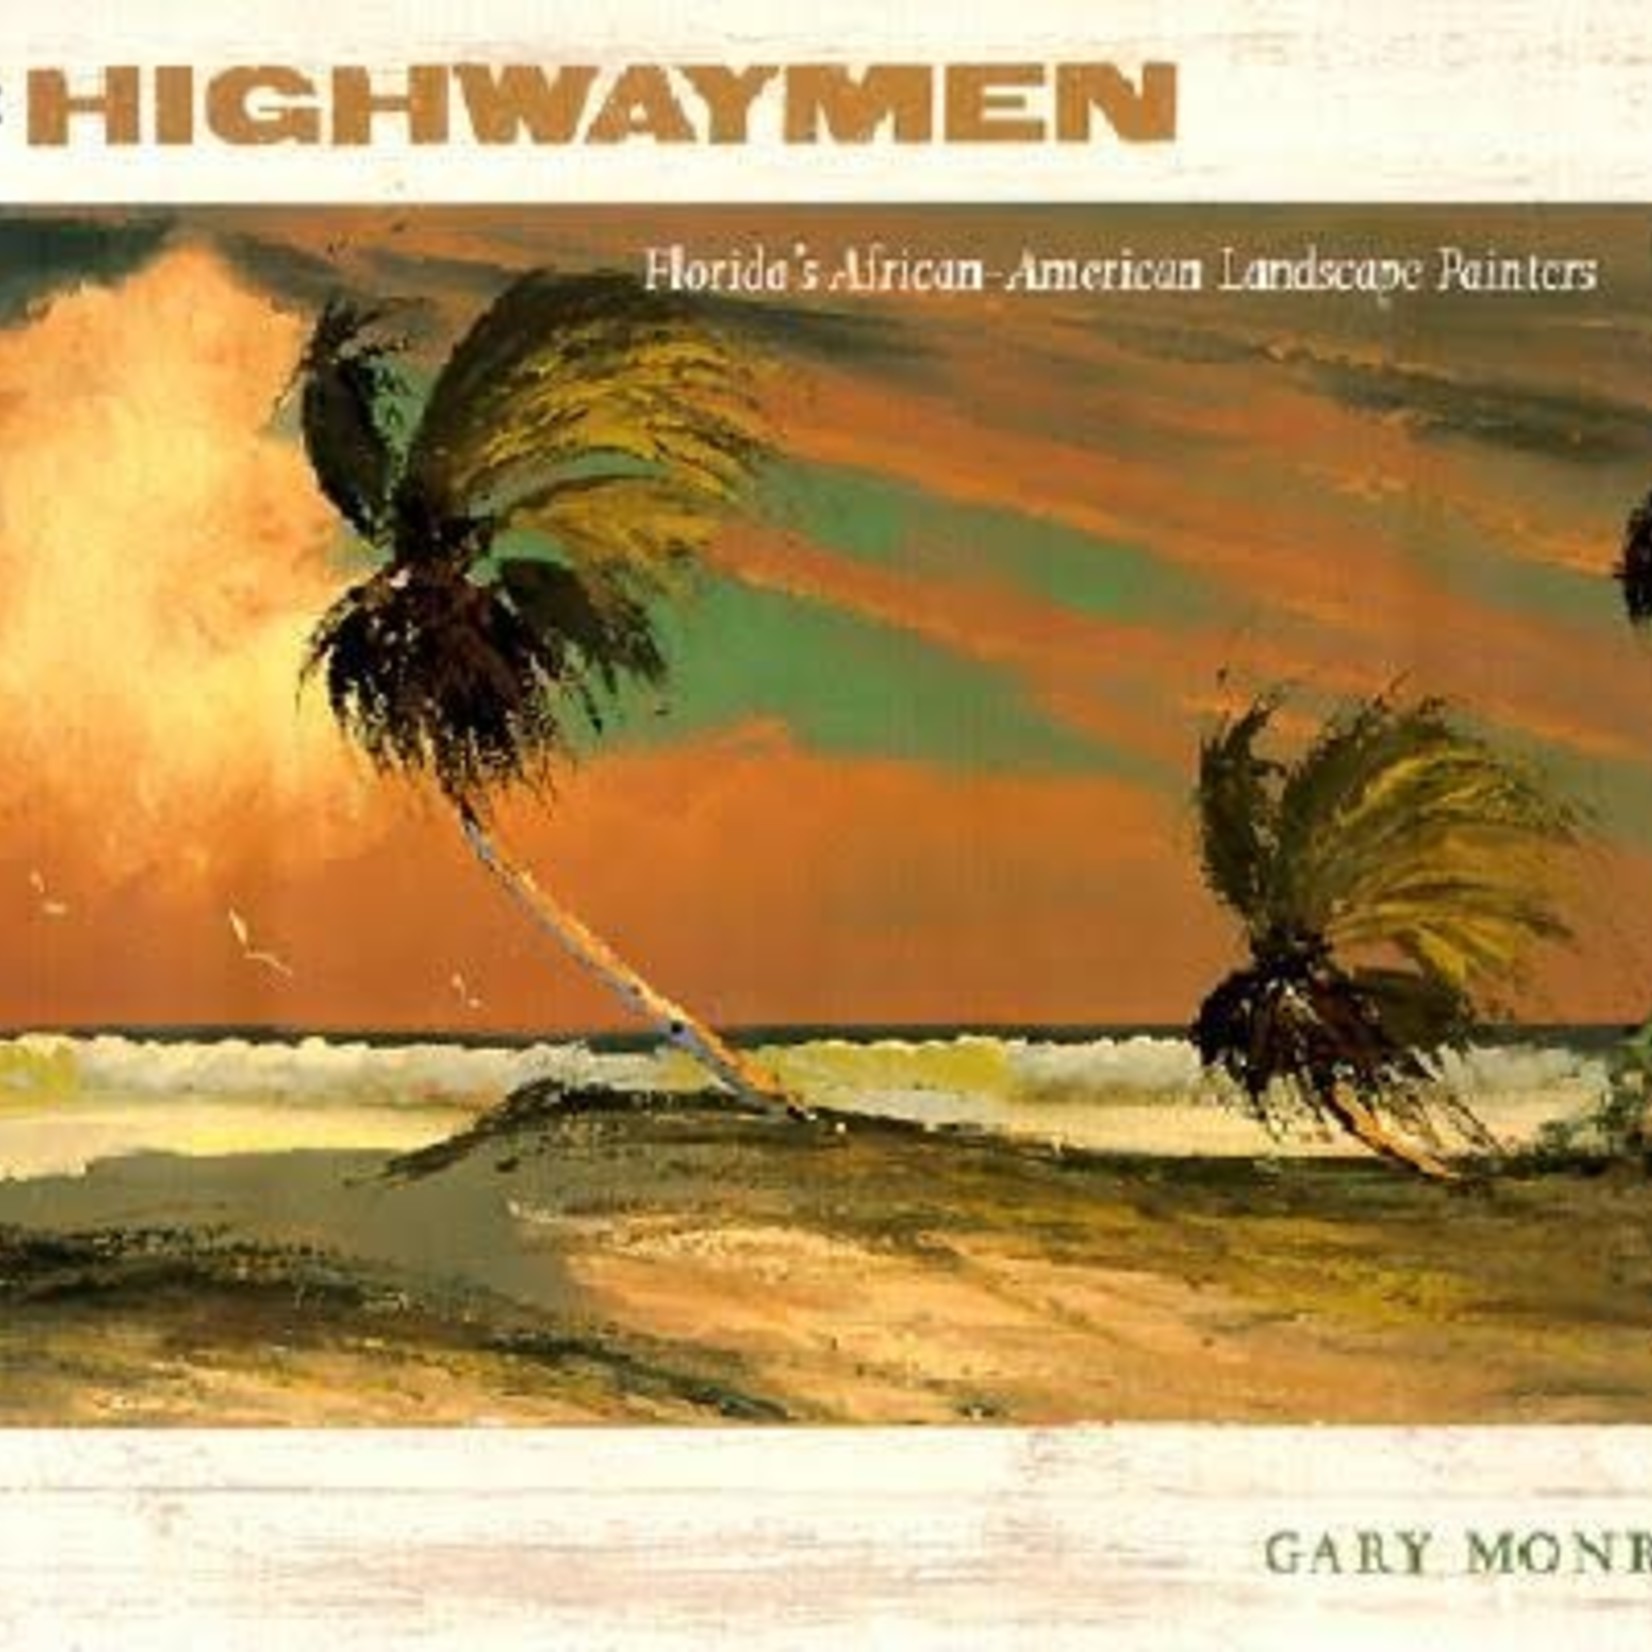 Rare Finds "The Highwaymen: Florida's African-American Landscape Painters," by Gary Monroe, RARE